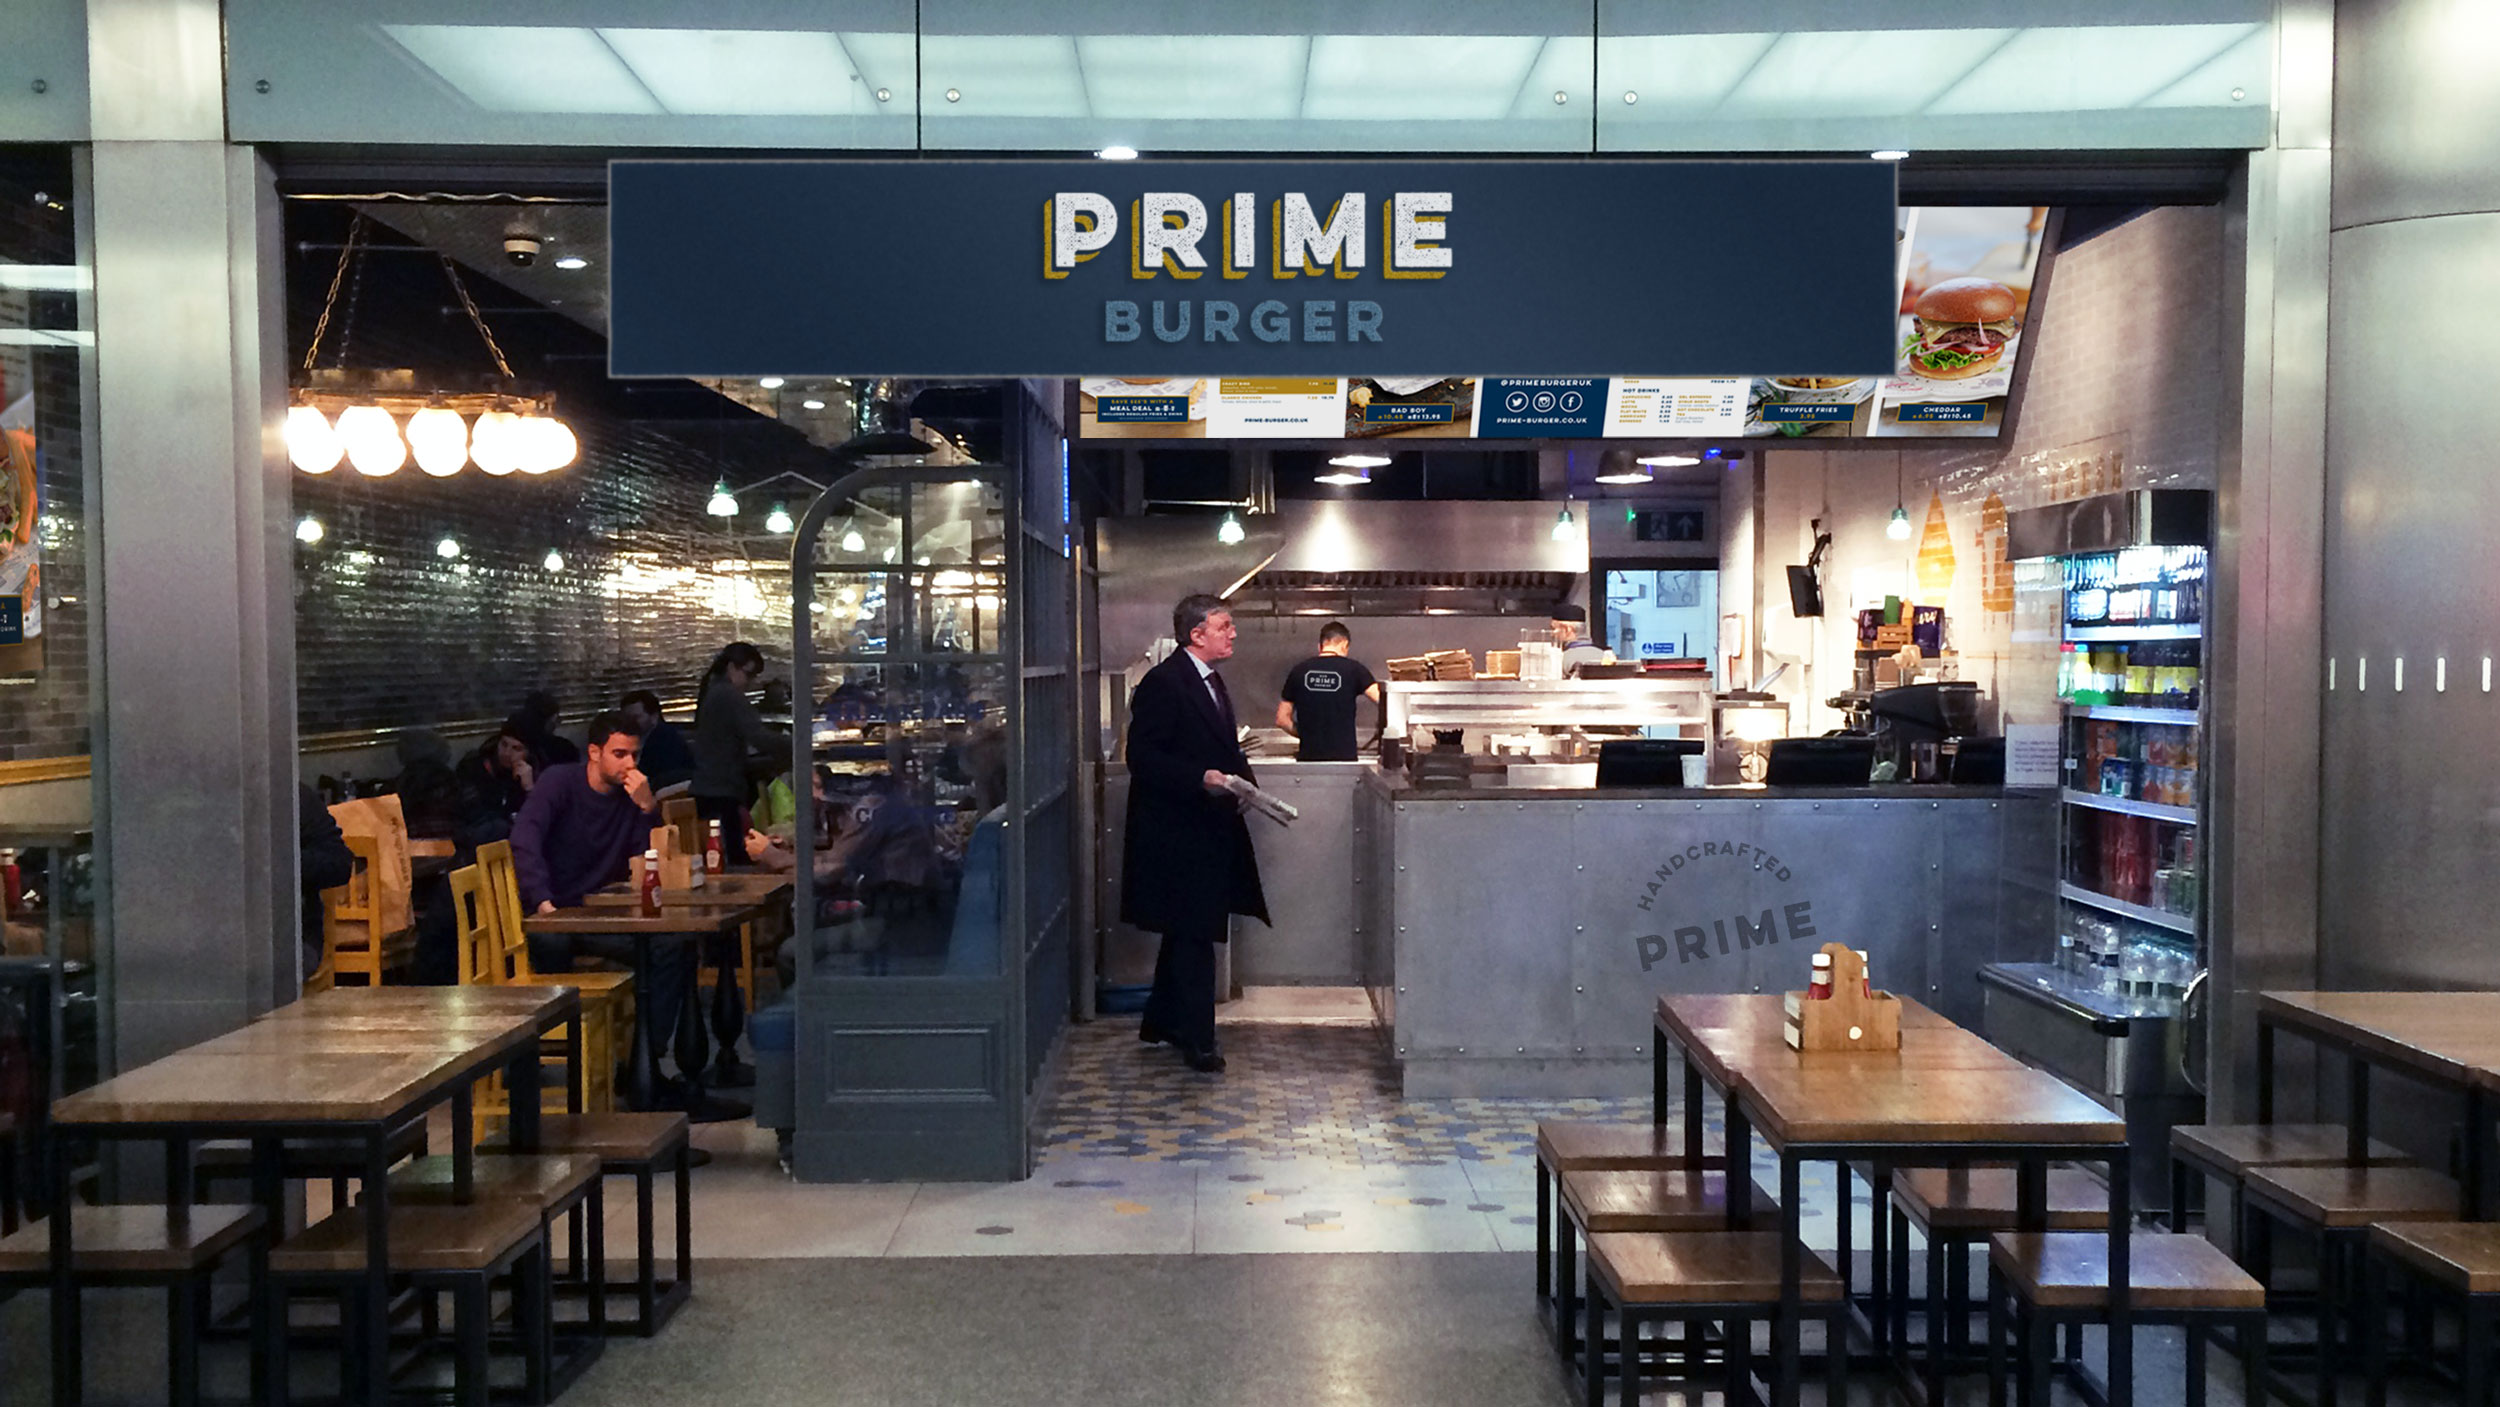 The branded facade of Prime Burger at Kings Cross St Pancras